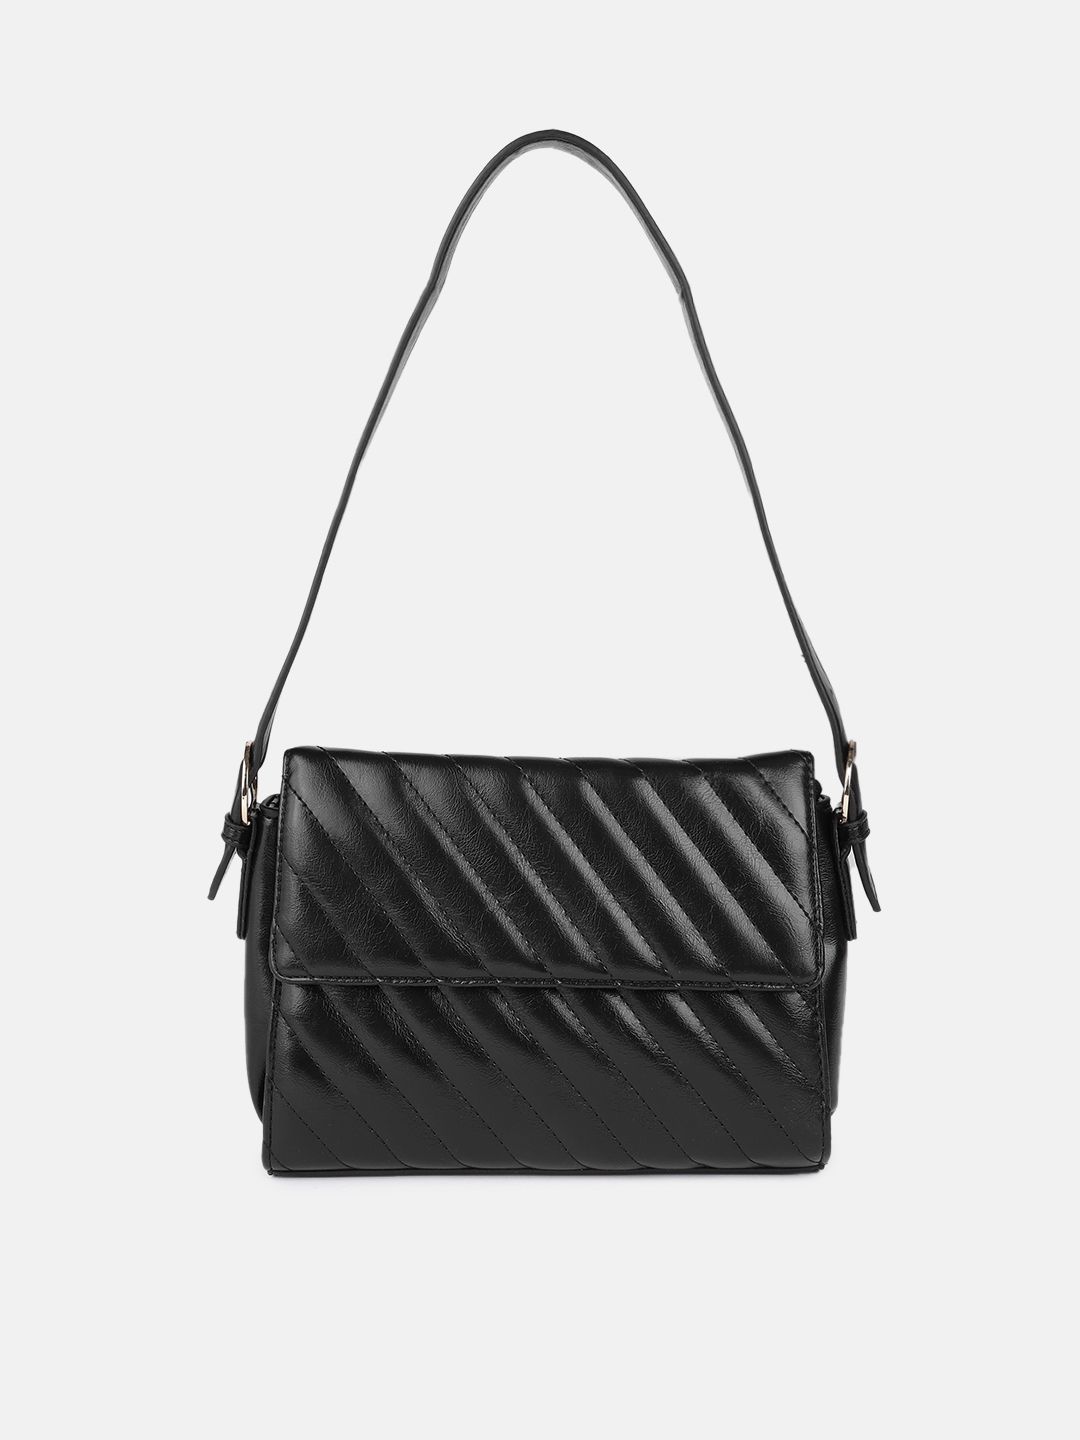 DressBerry Black PU Structured Quilted Shoulder Bag Price in India